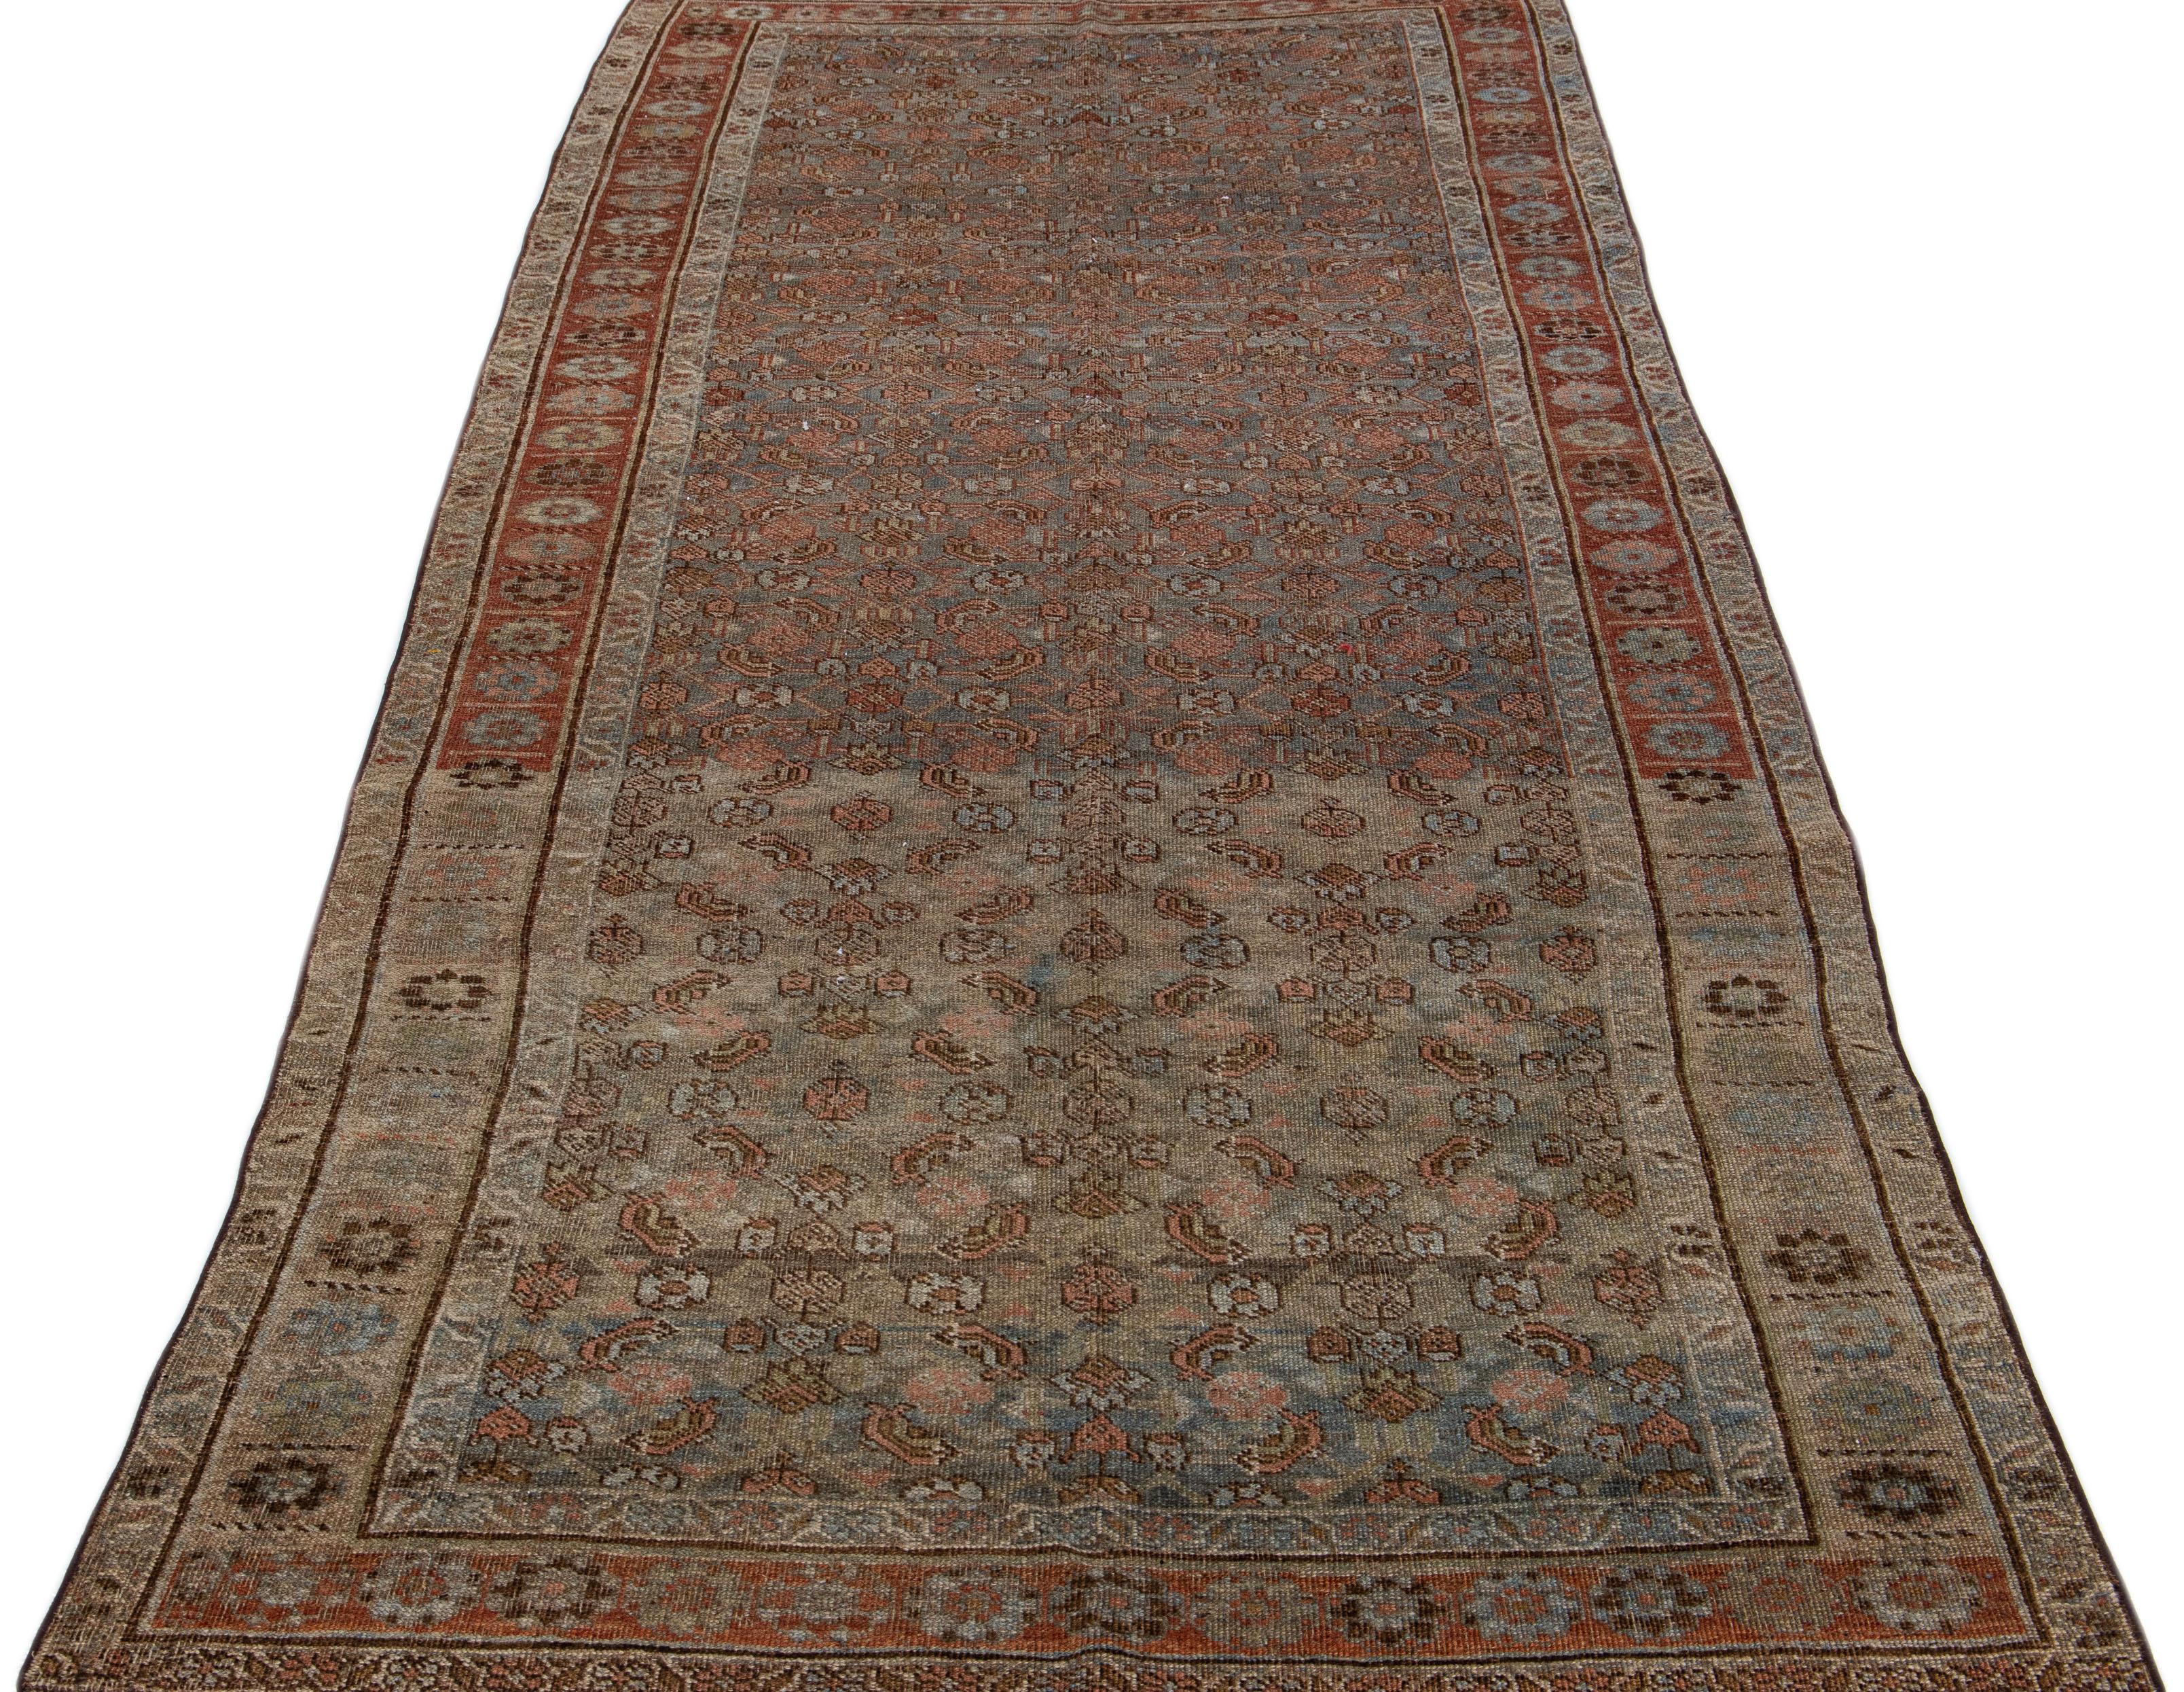 Beautiful antique Malayer hand-knotted wool rug with a blue color field. This Persian rug has rust accents in a gorgeous traditional floral design.

This rug measures 4'9